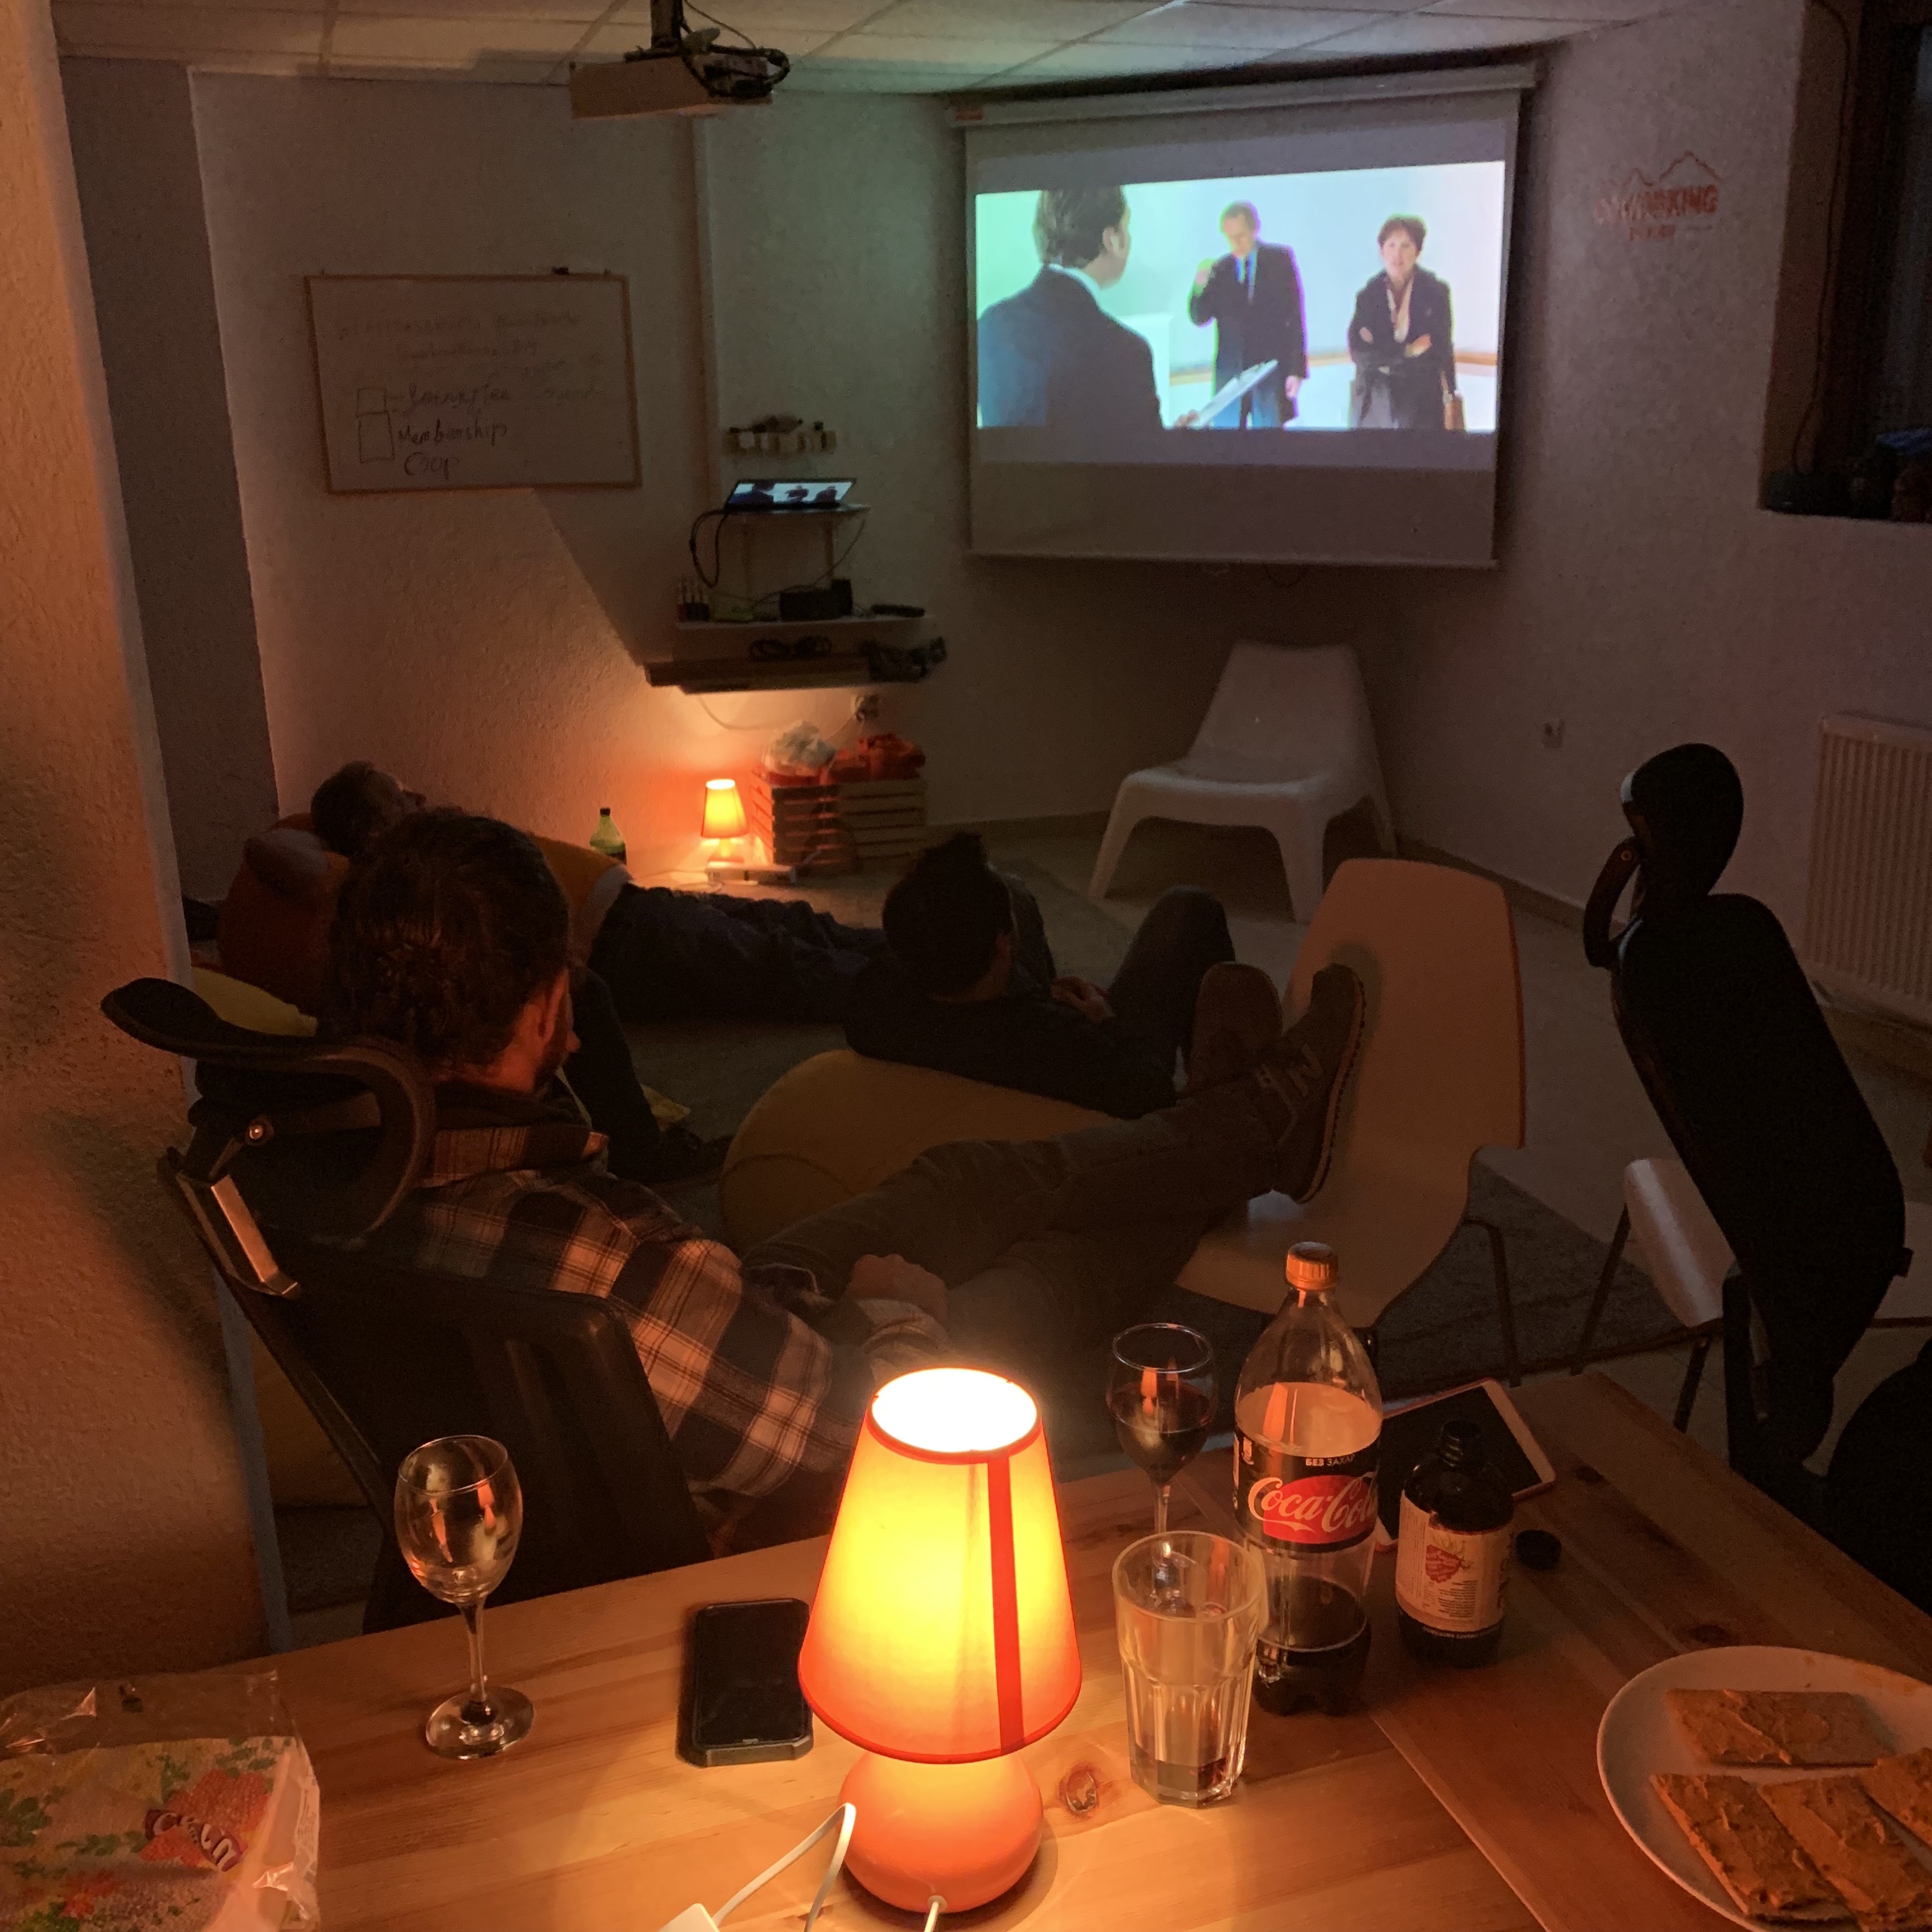 a group of people sitting in chairs watching a projector